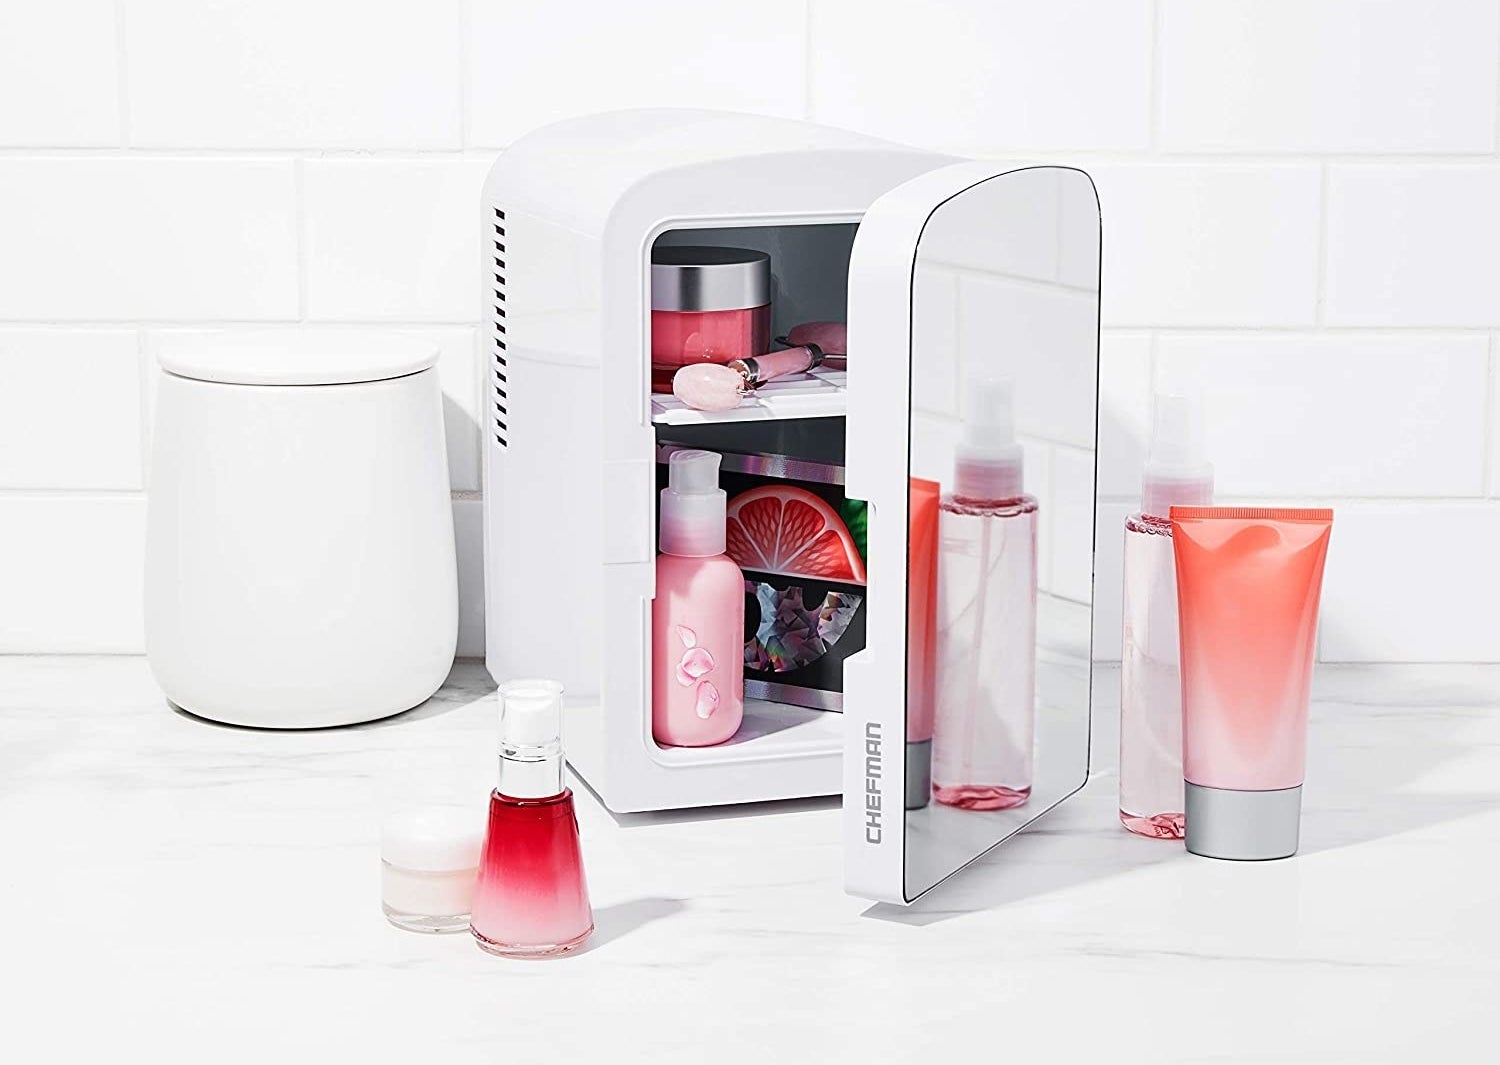 The mirrored four-liter mini fridge which has two shelves